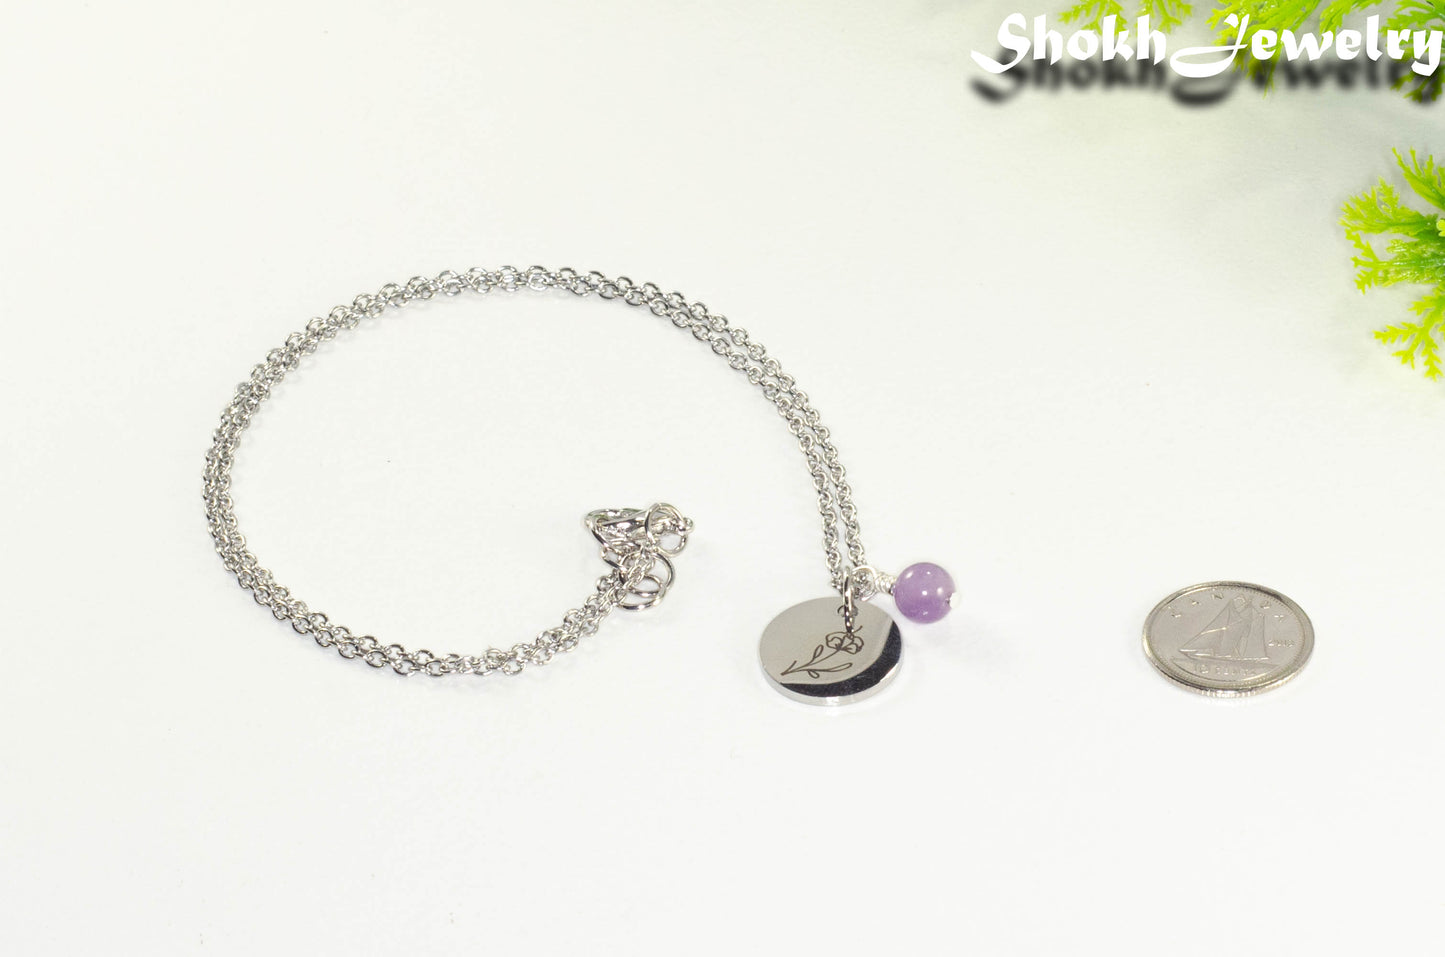 February Birth Flower Necklace with Amethyst Birthstone Pendant beside a dime.